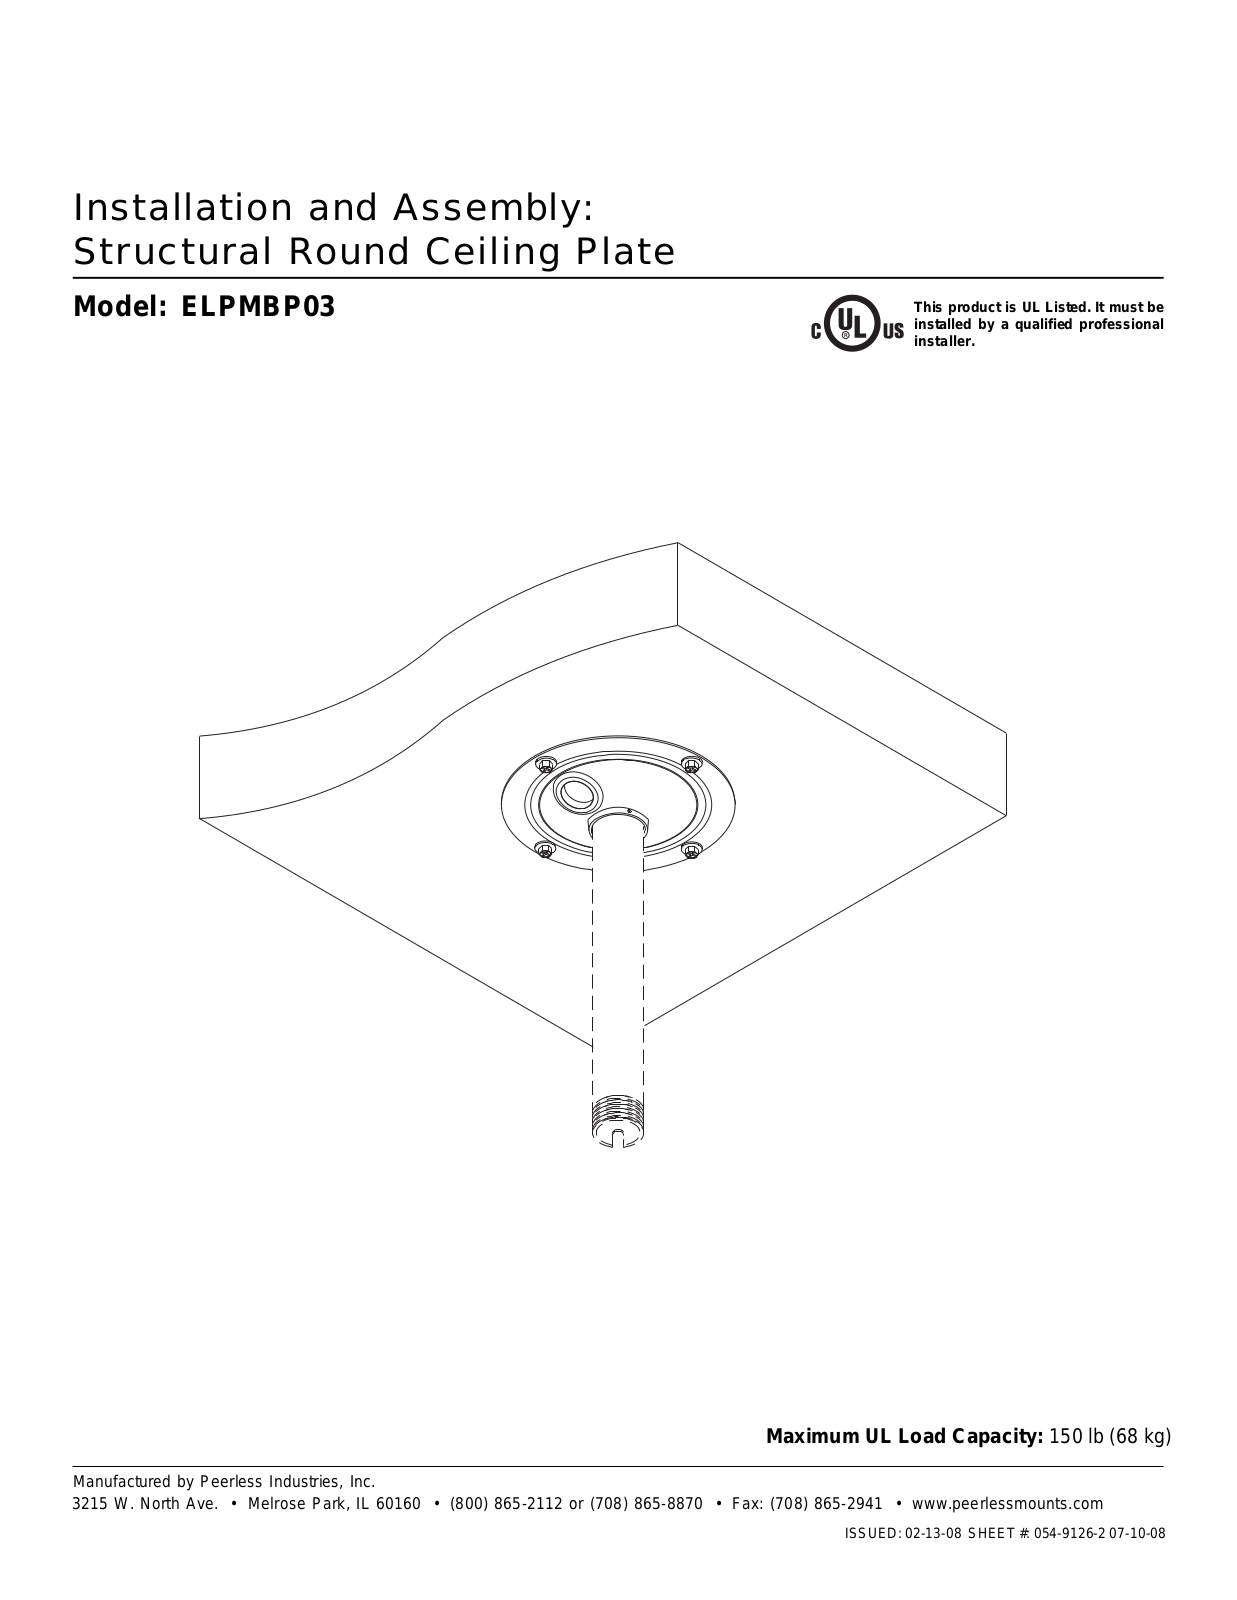 Epson Structural Round Ceiling Plate Installation Guide